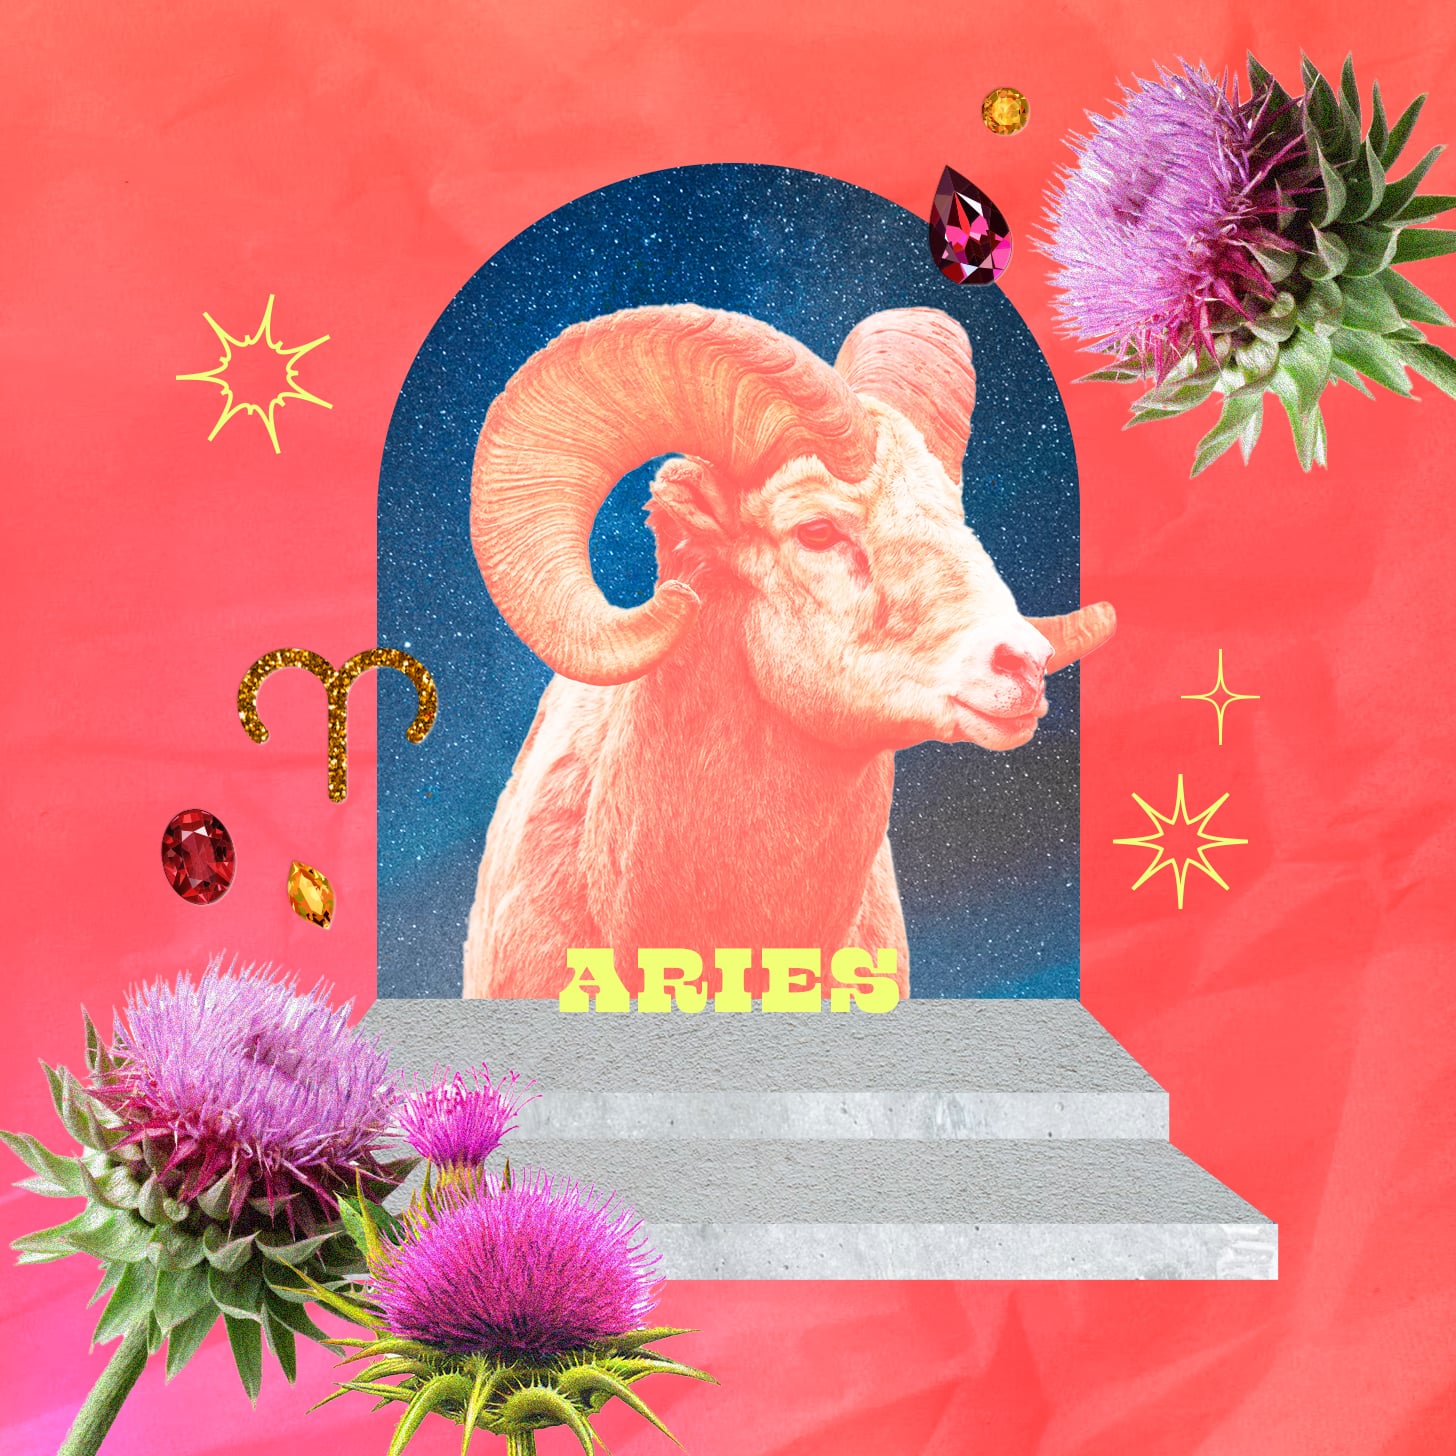 Aries weekly horoscope for May 1, 2022